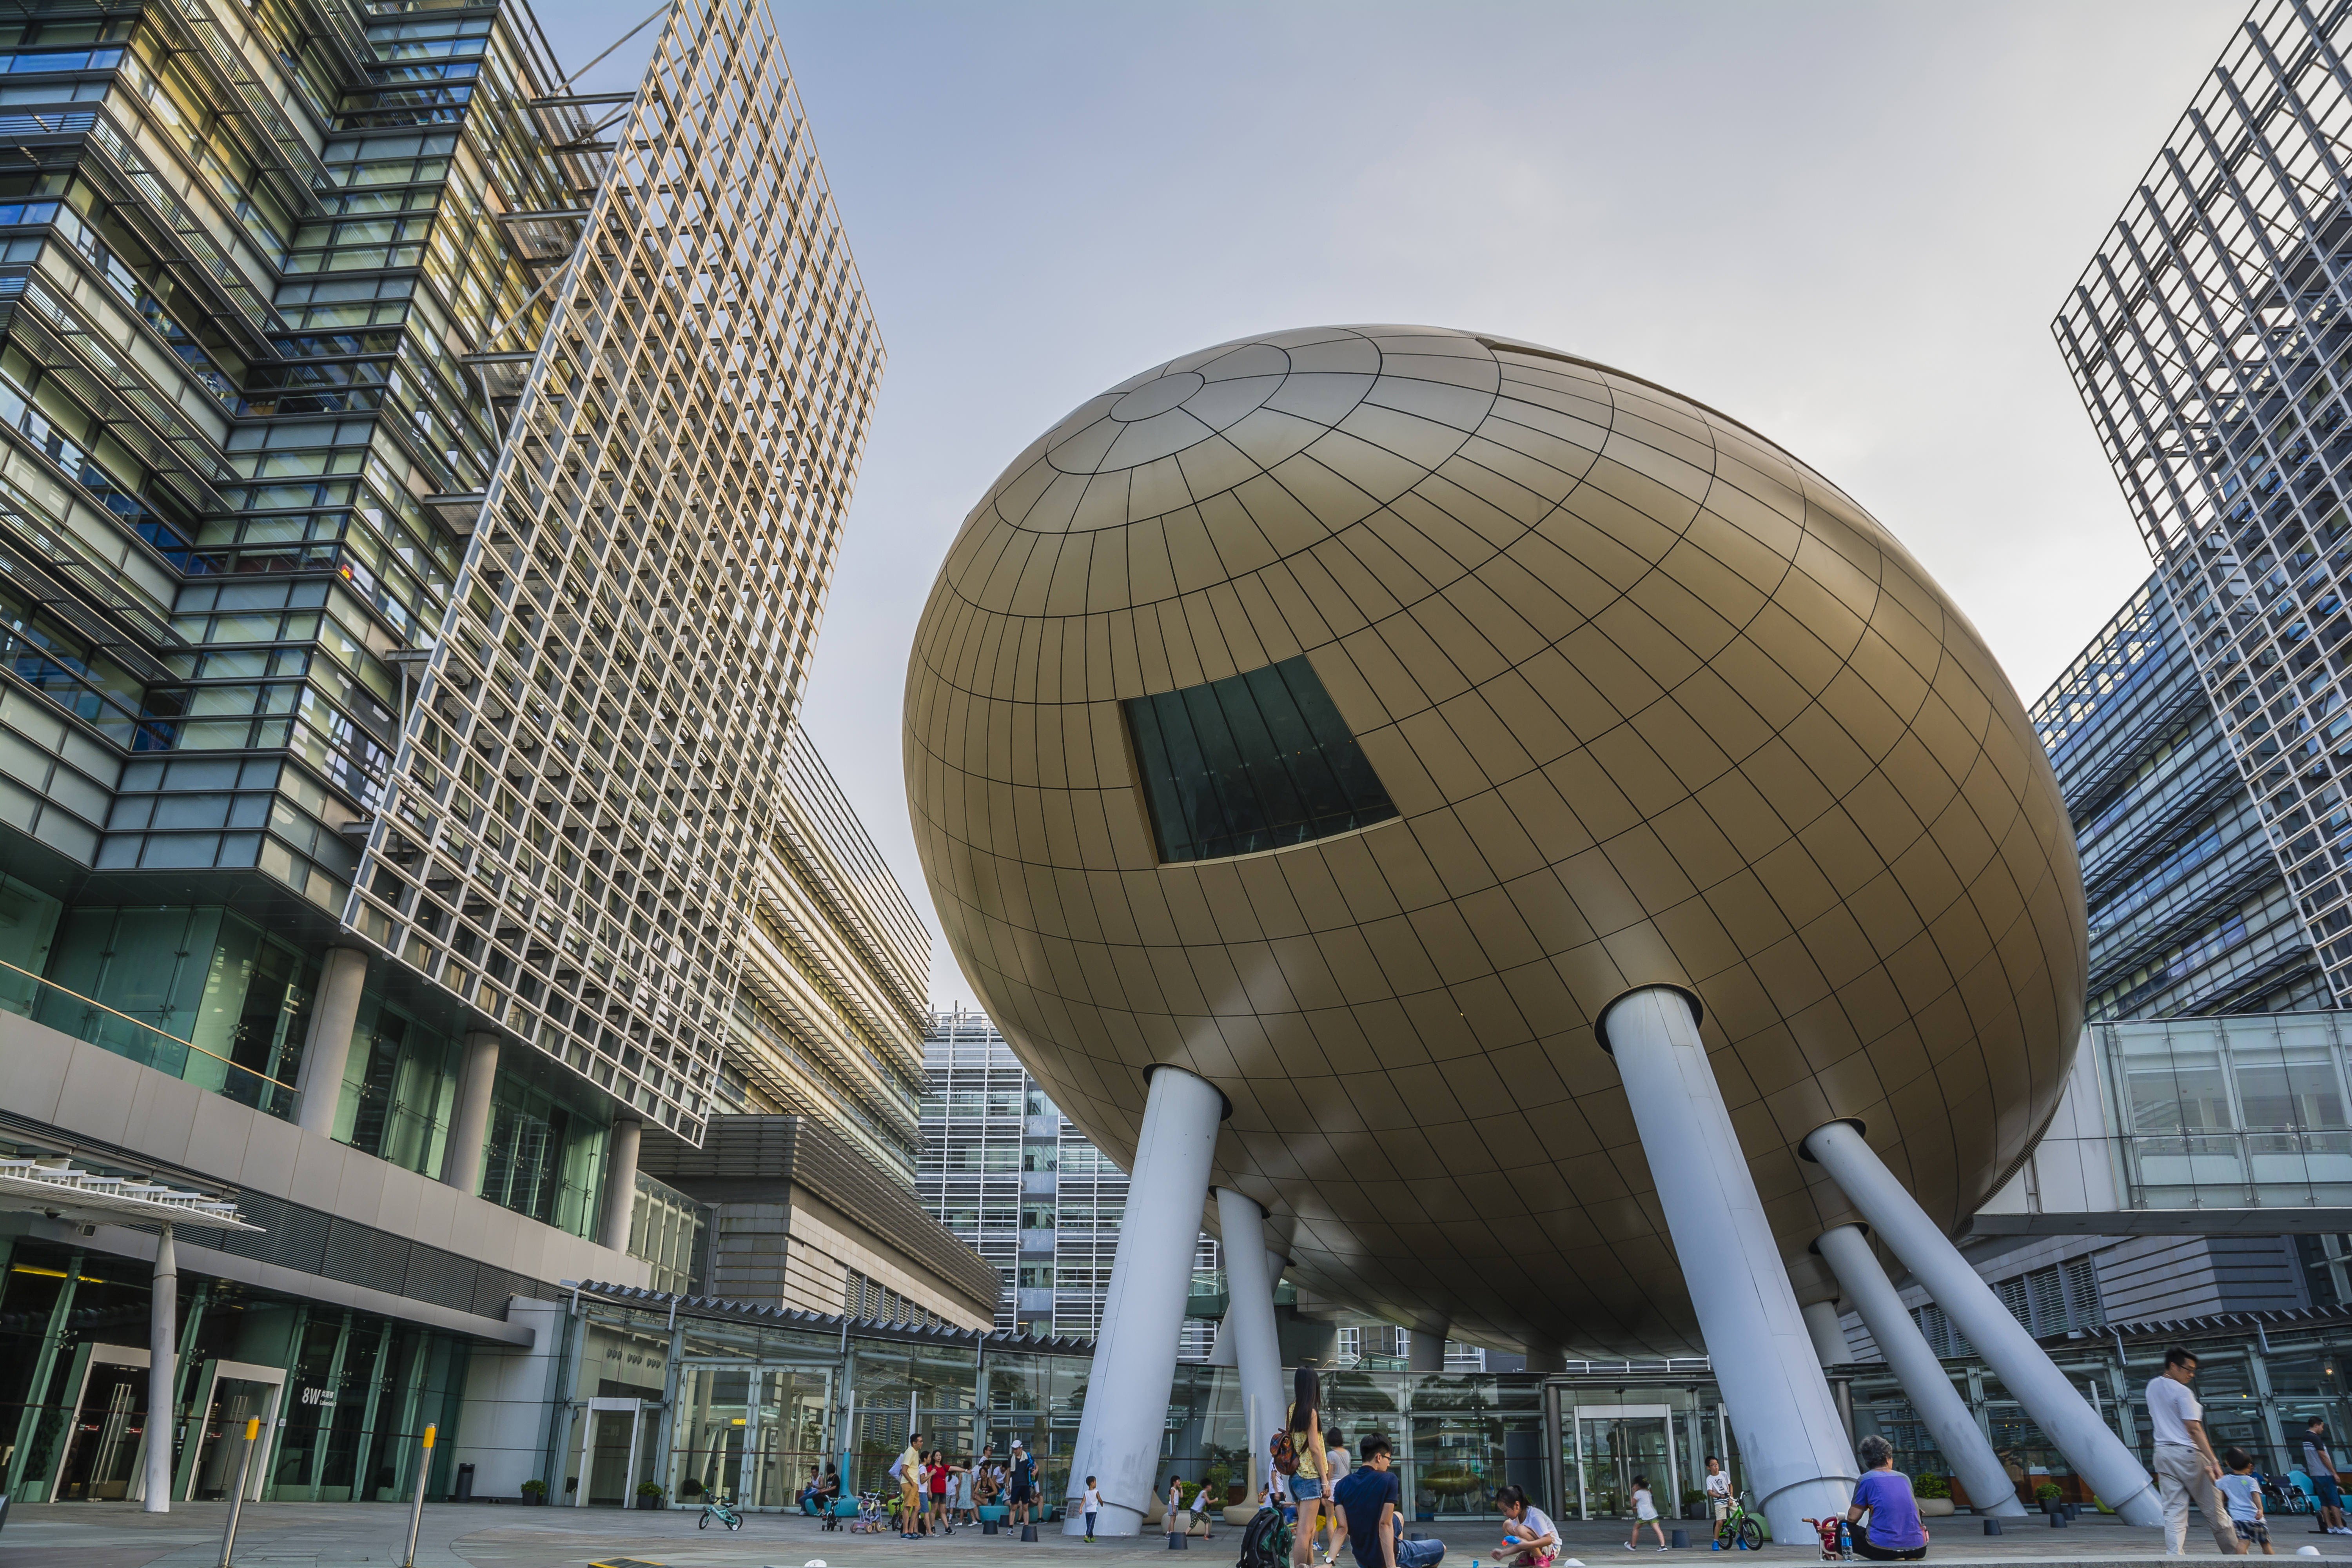 HK$45 billion funding praised as ‘good start’ but call goes out to nurture talent and offer better career opportunities for young researchers